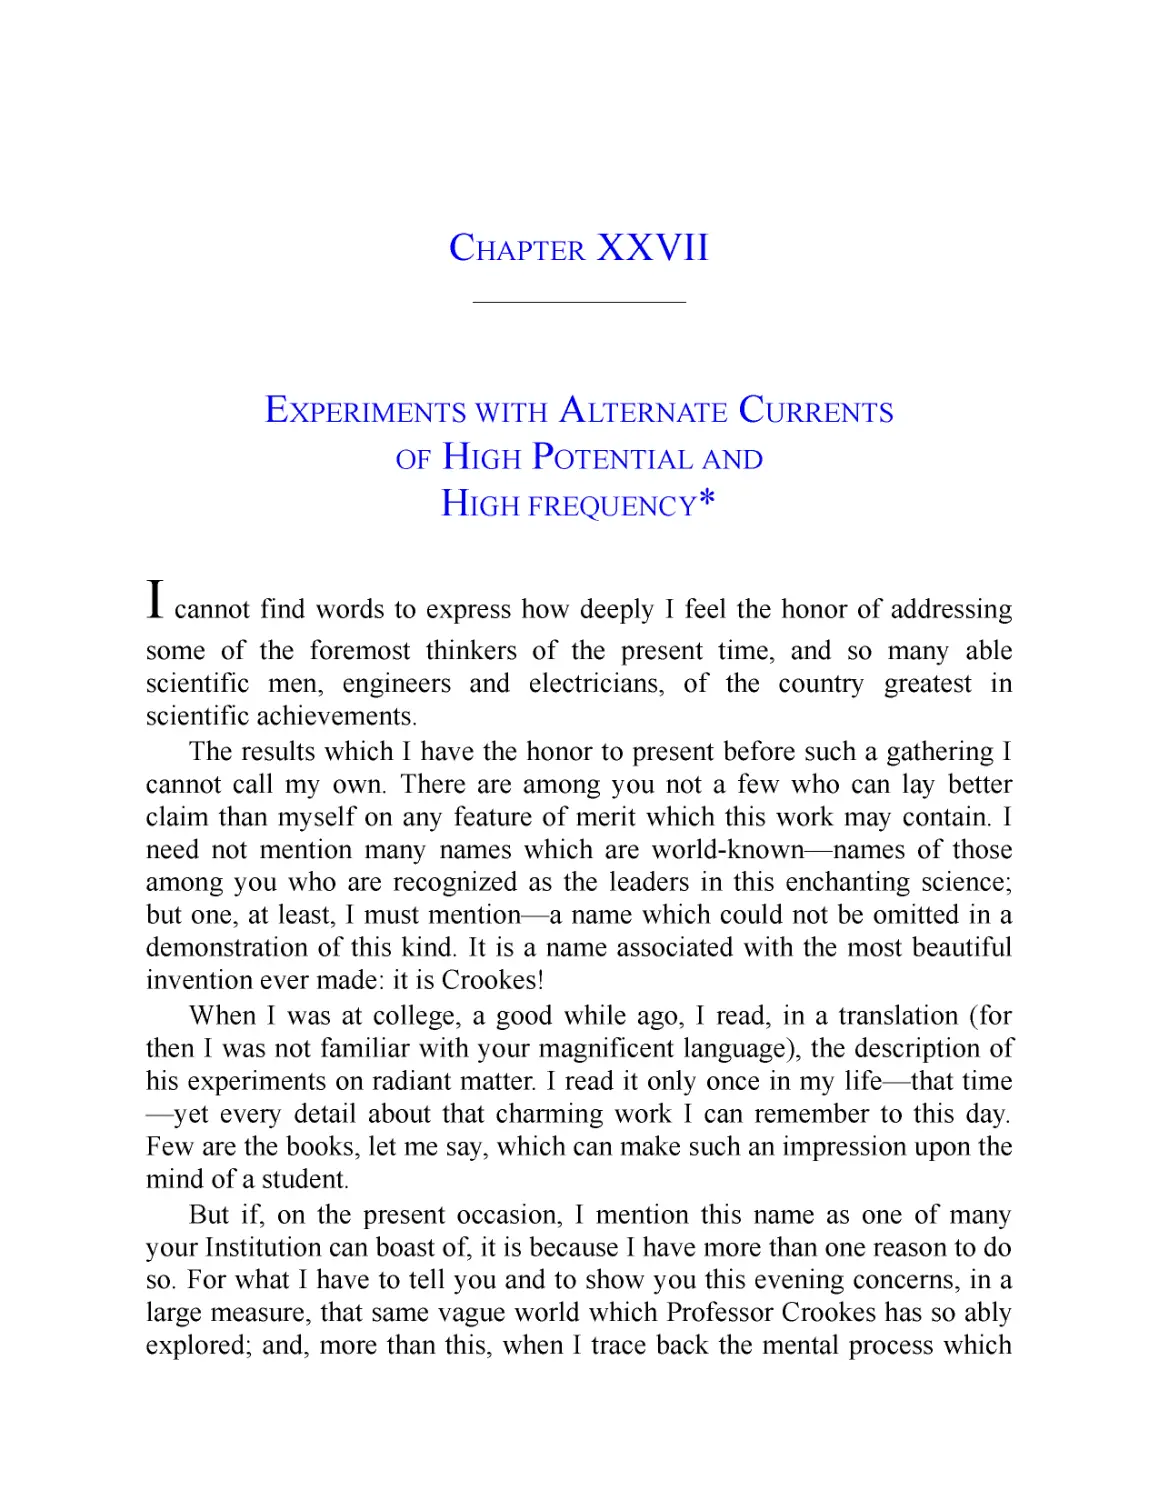 ﻿Chapter XXVII: Experiments with Alternate Currents of High Potential and High Frequenc